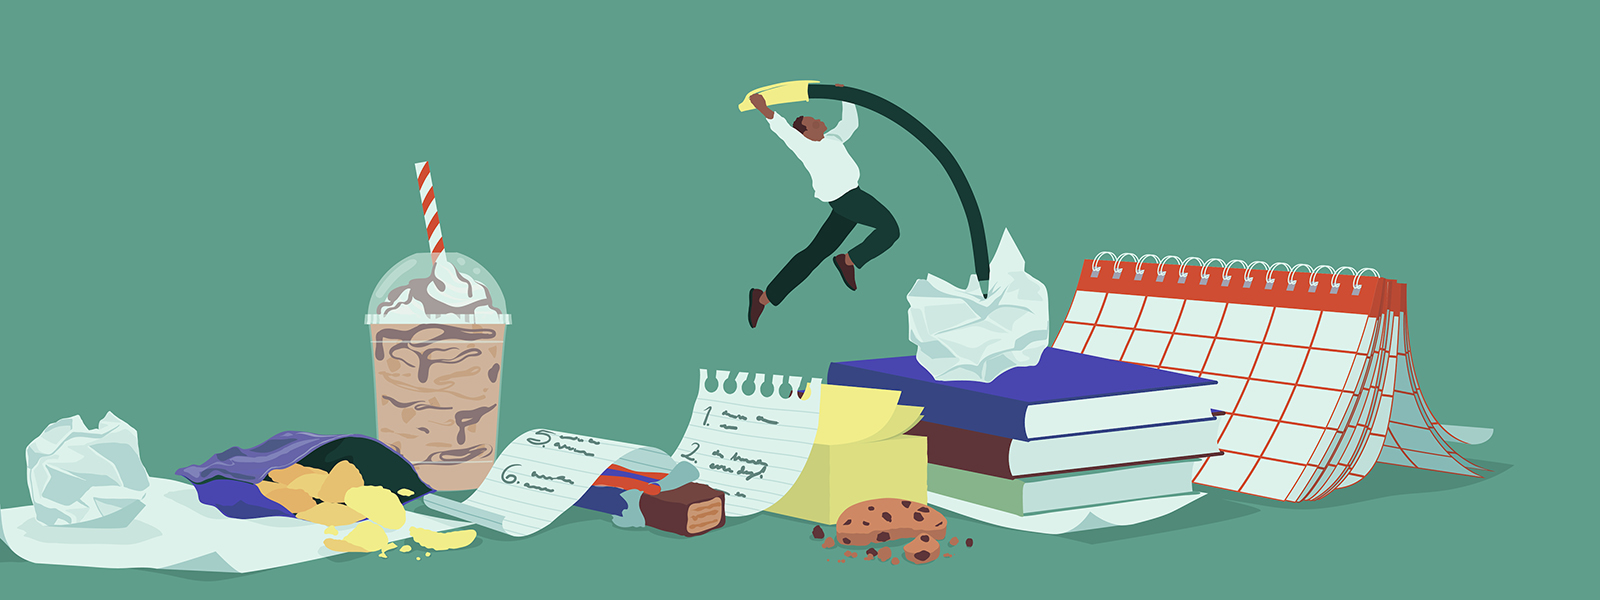 Conceptual illustration shows a person vaulting over a book and calendar away from bad habits and poor willpower, as depicted by unhealthy food and money and scrunched-up paper.